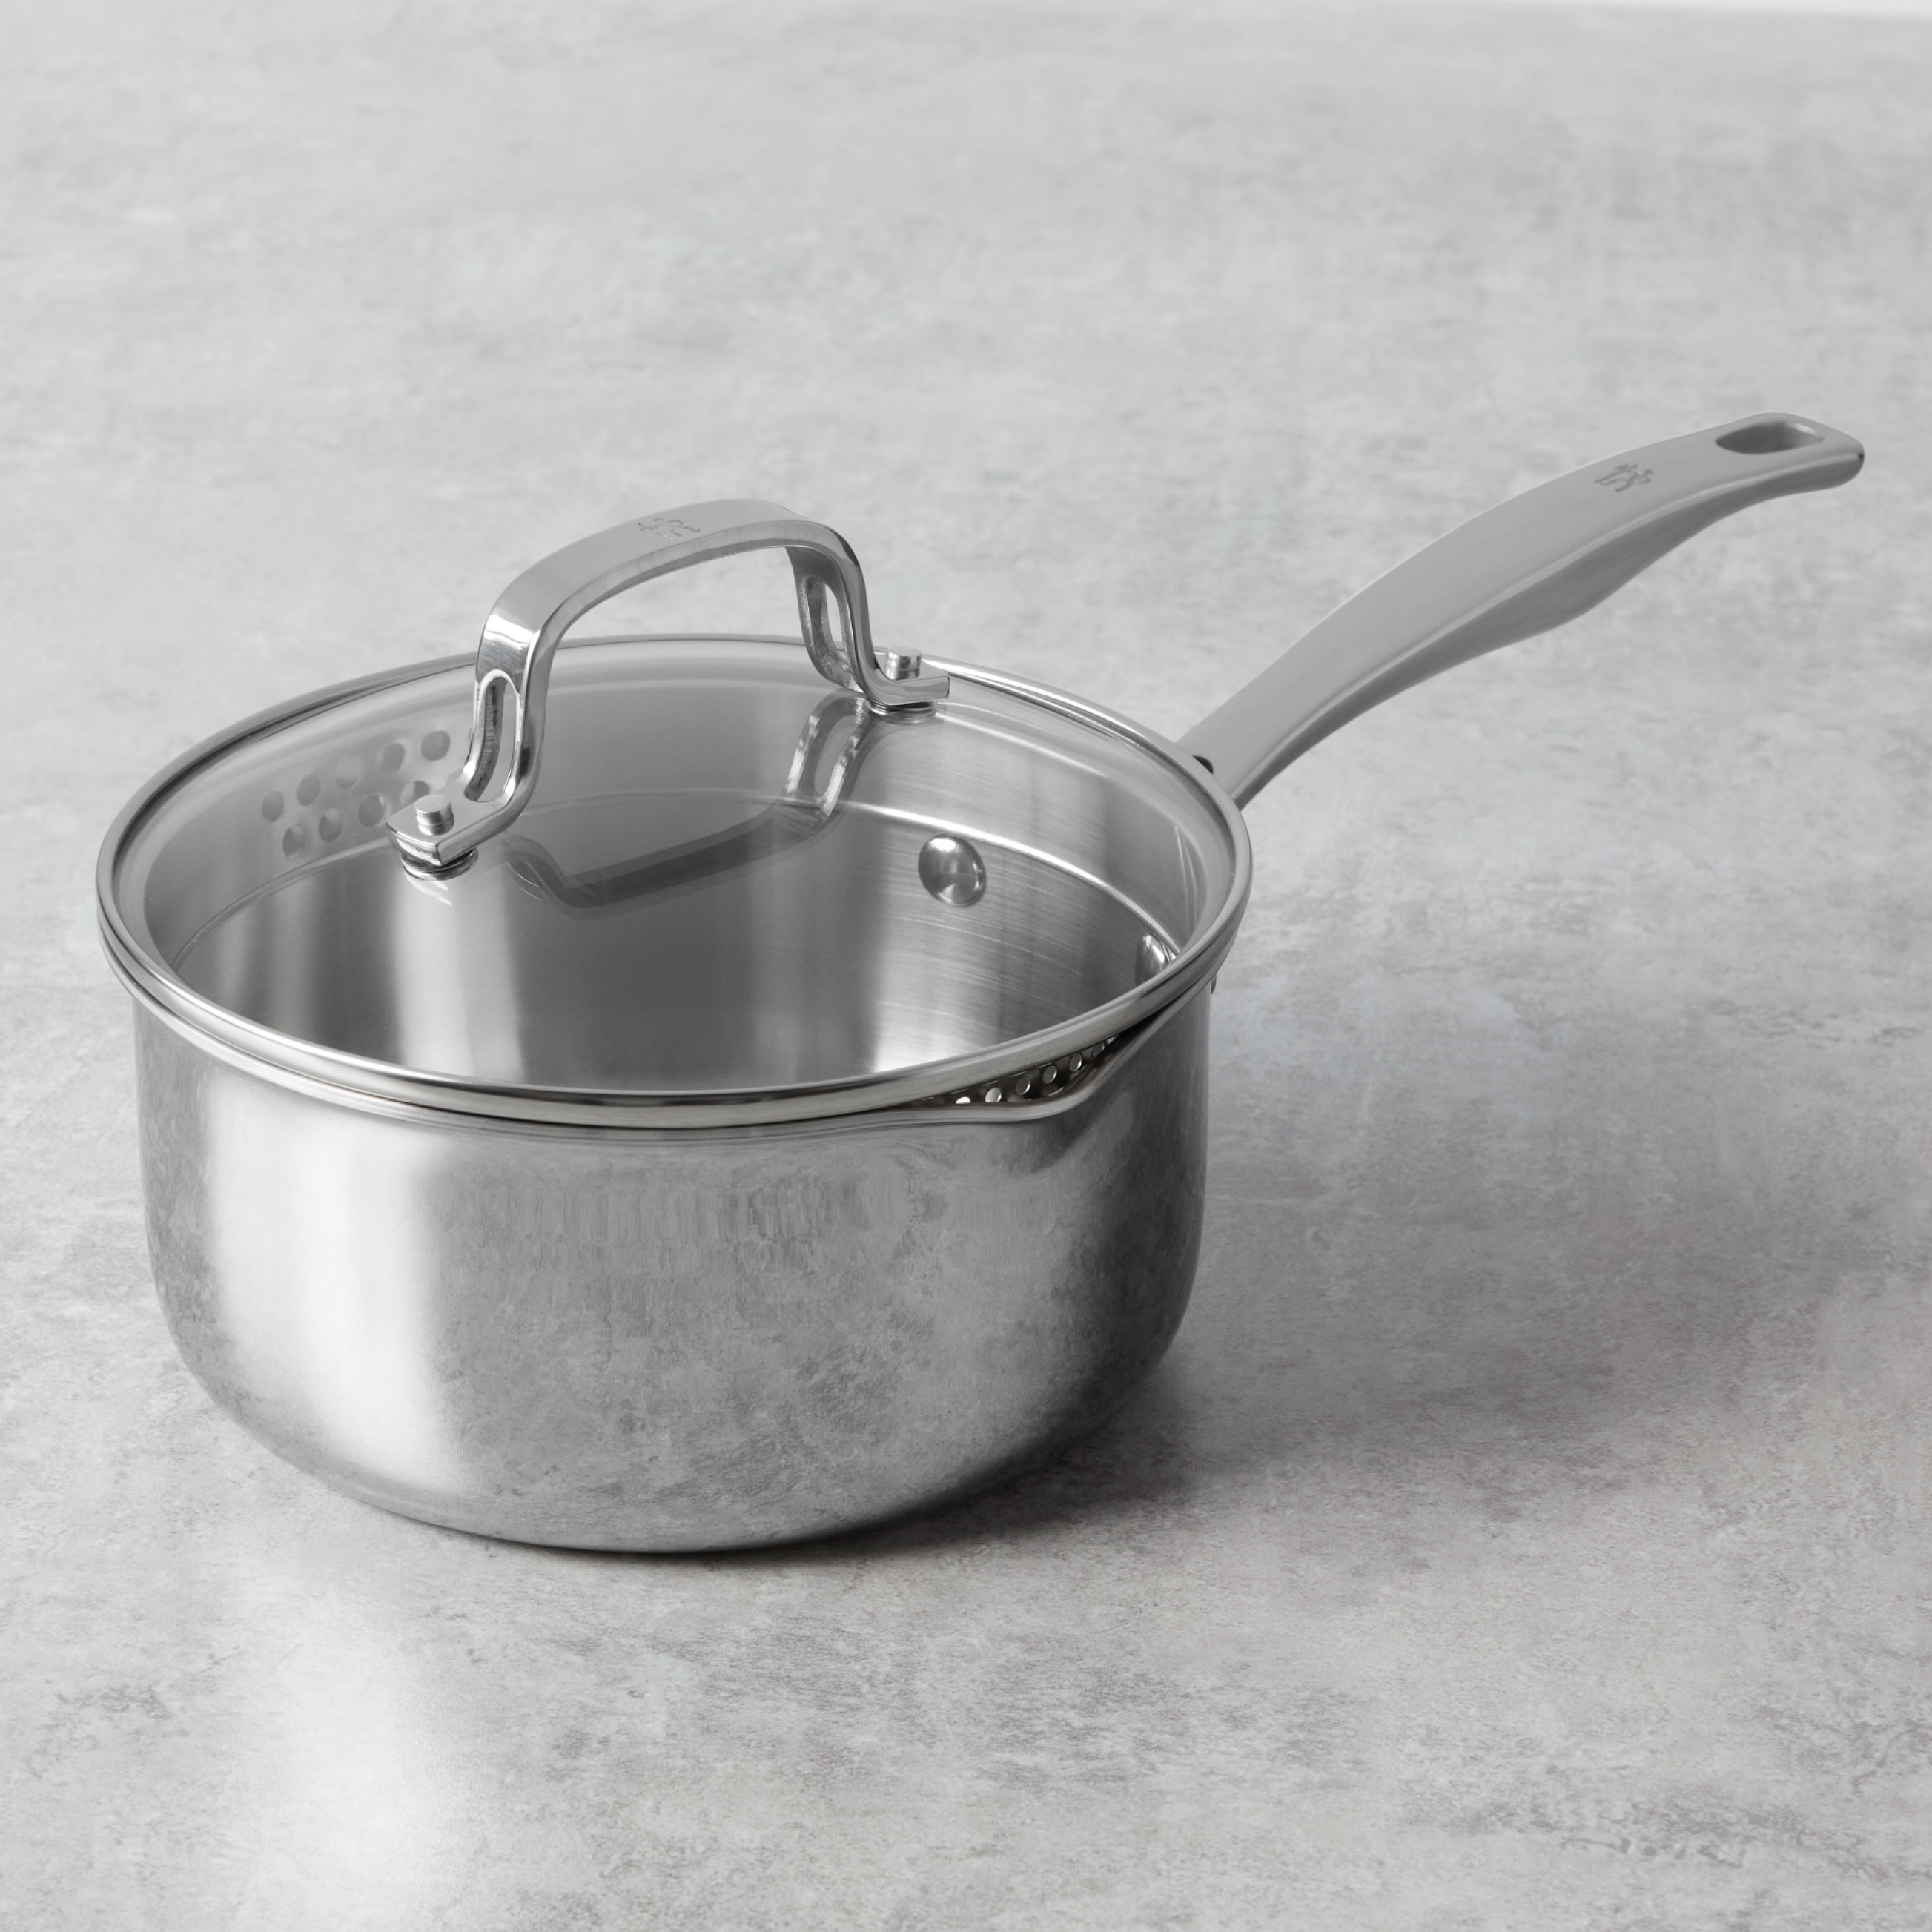 Commercial Clad Stainless Steel Sauce Pots